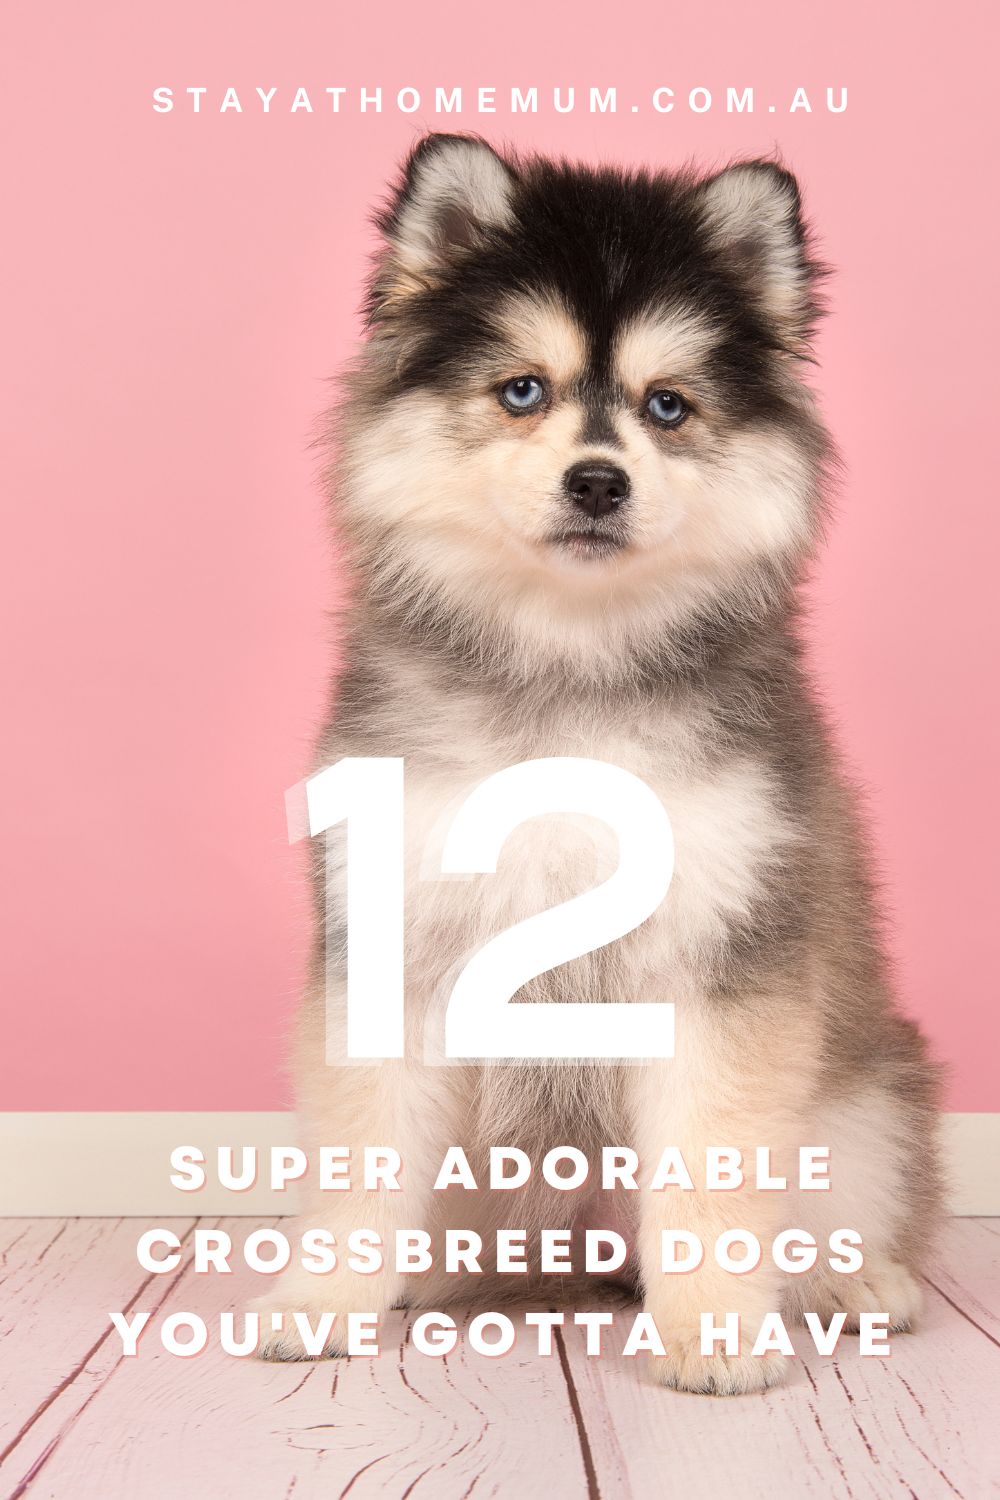 12 Super Adorable Crossbreed Dogs You've Gotta Have I Stay at Home Mum